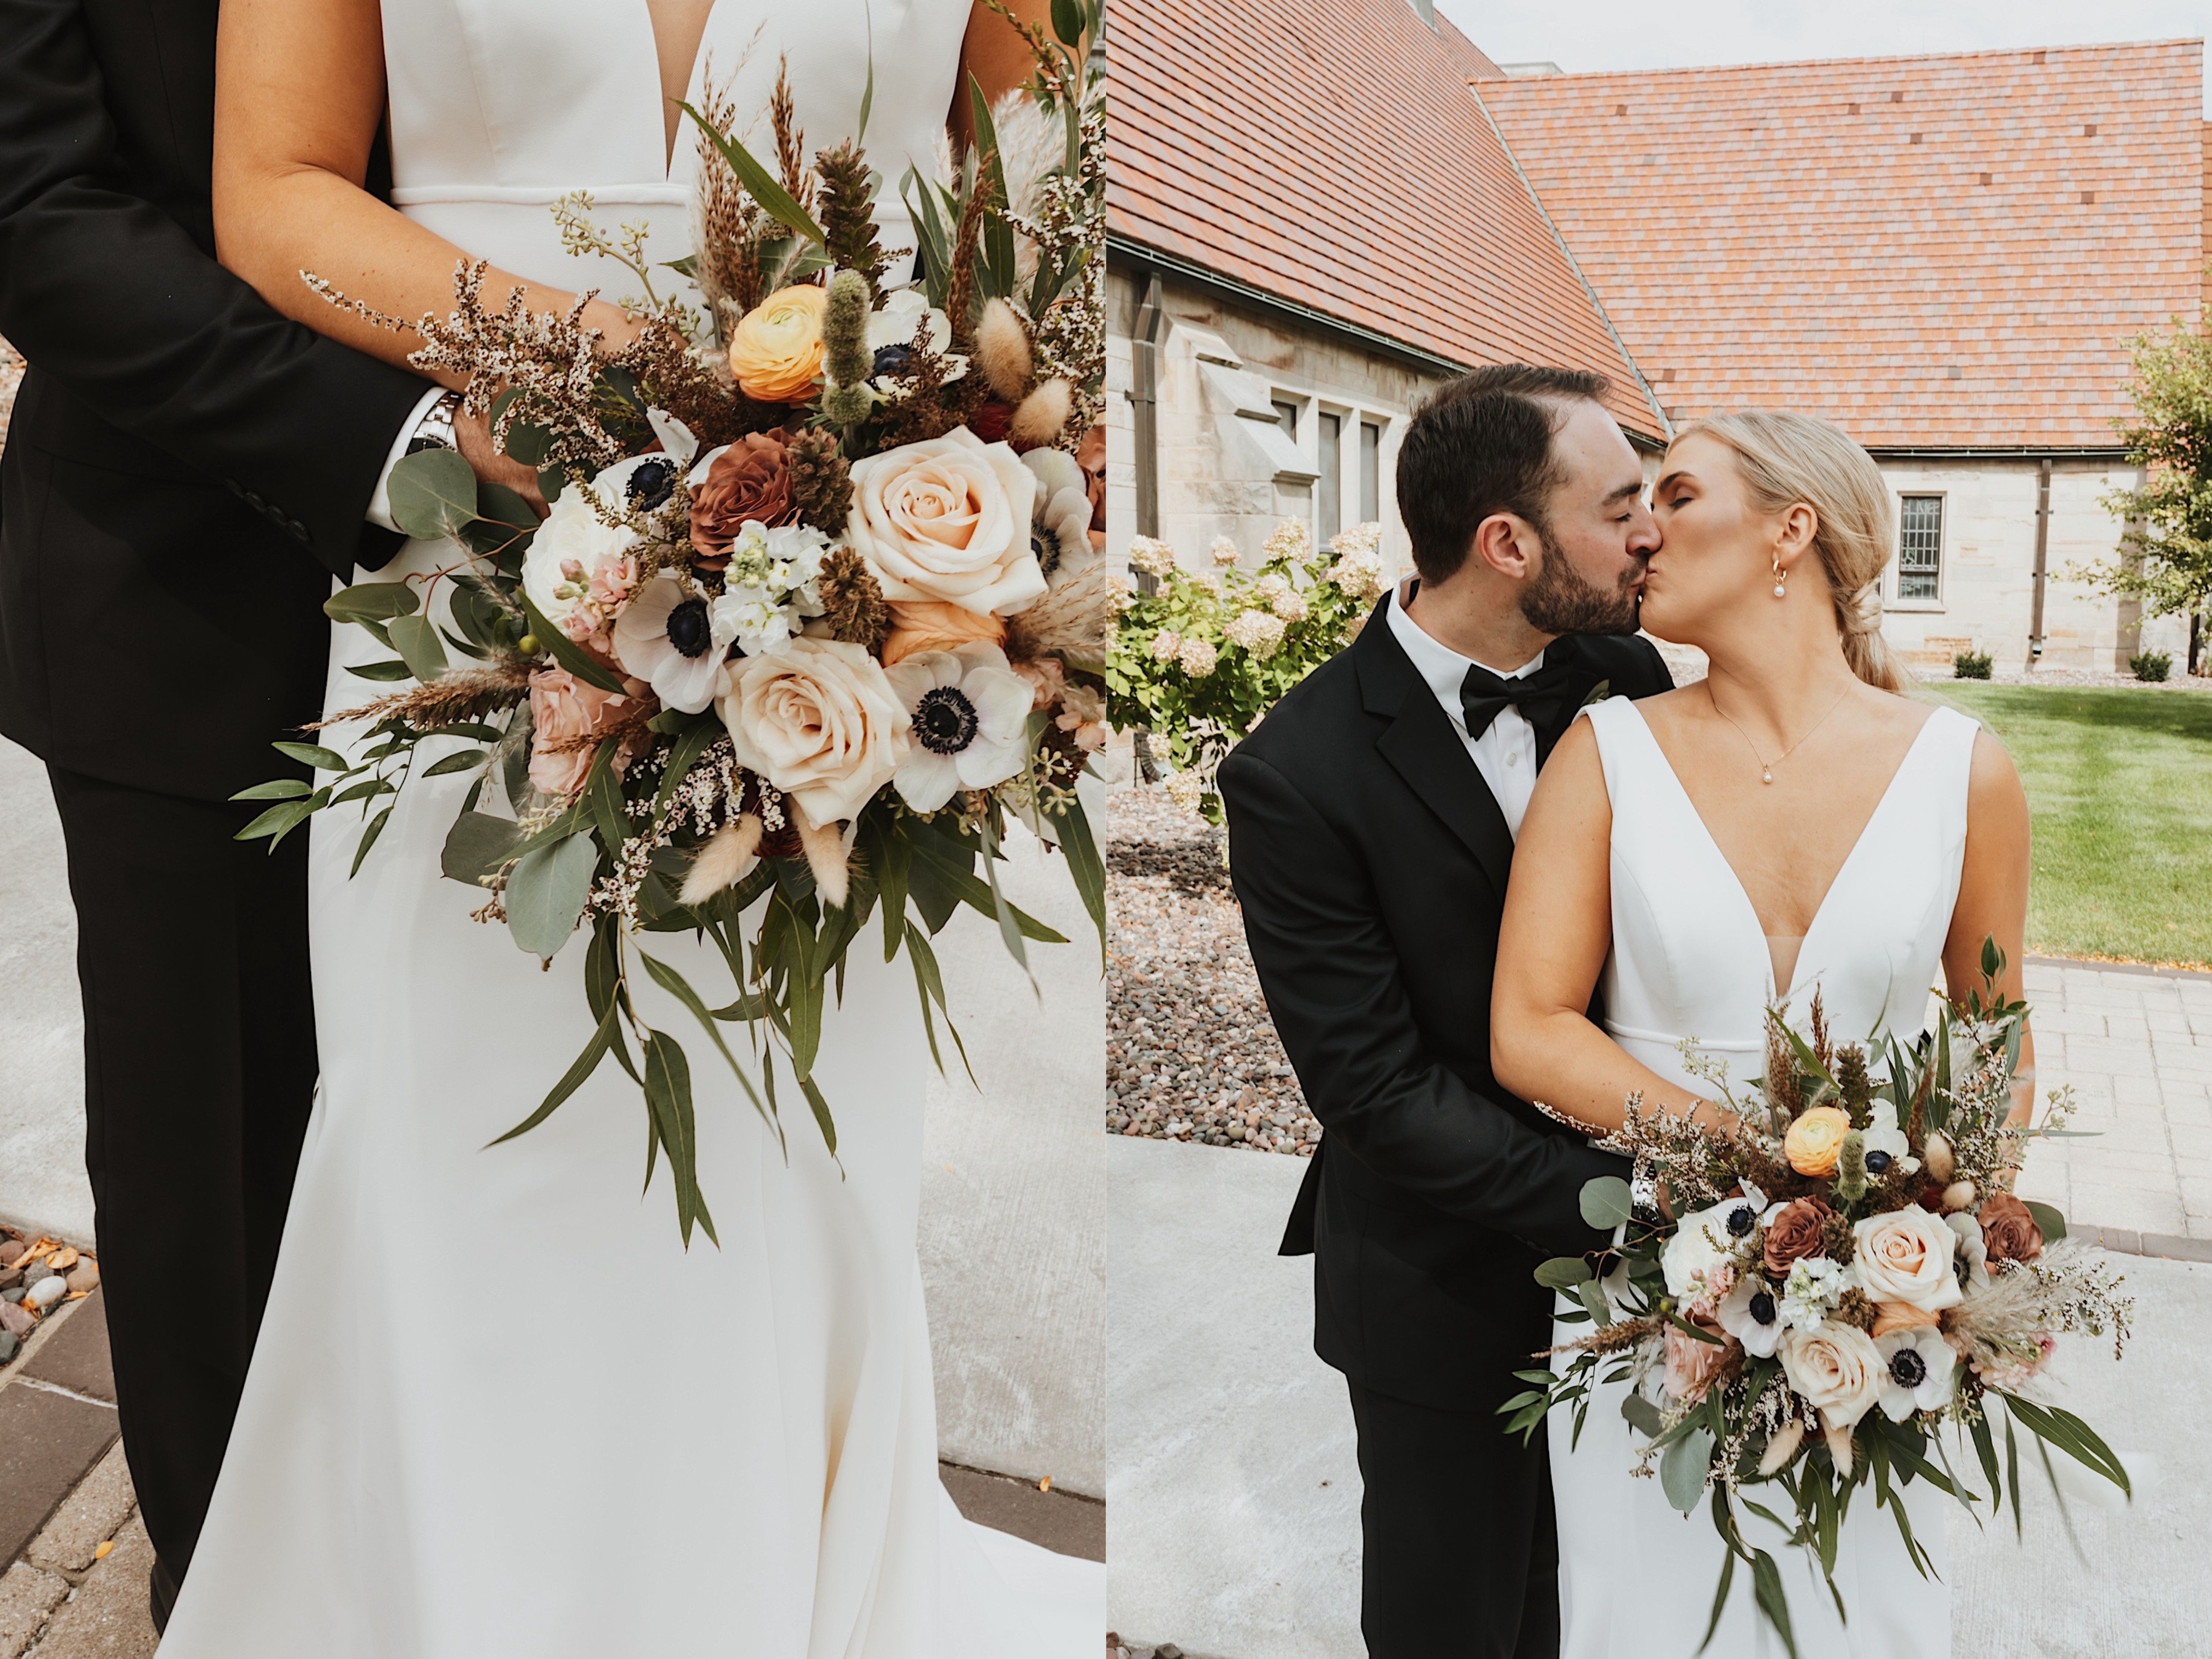 2 photos side by side, the left is a close up of a bouquet being held by a bride with the groom behind her, the right is of the bride and groom kissing